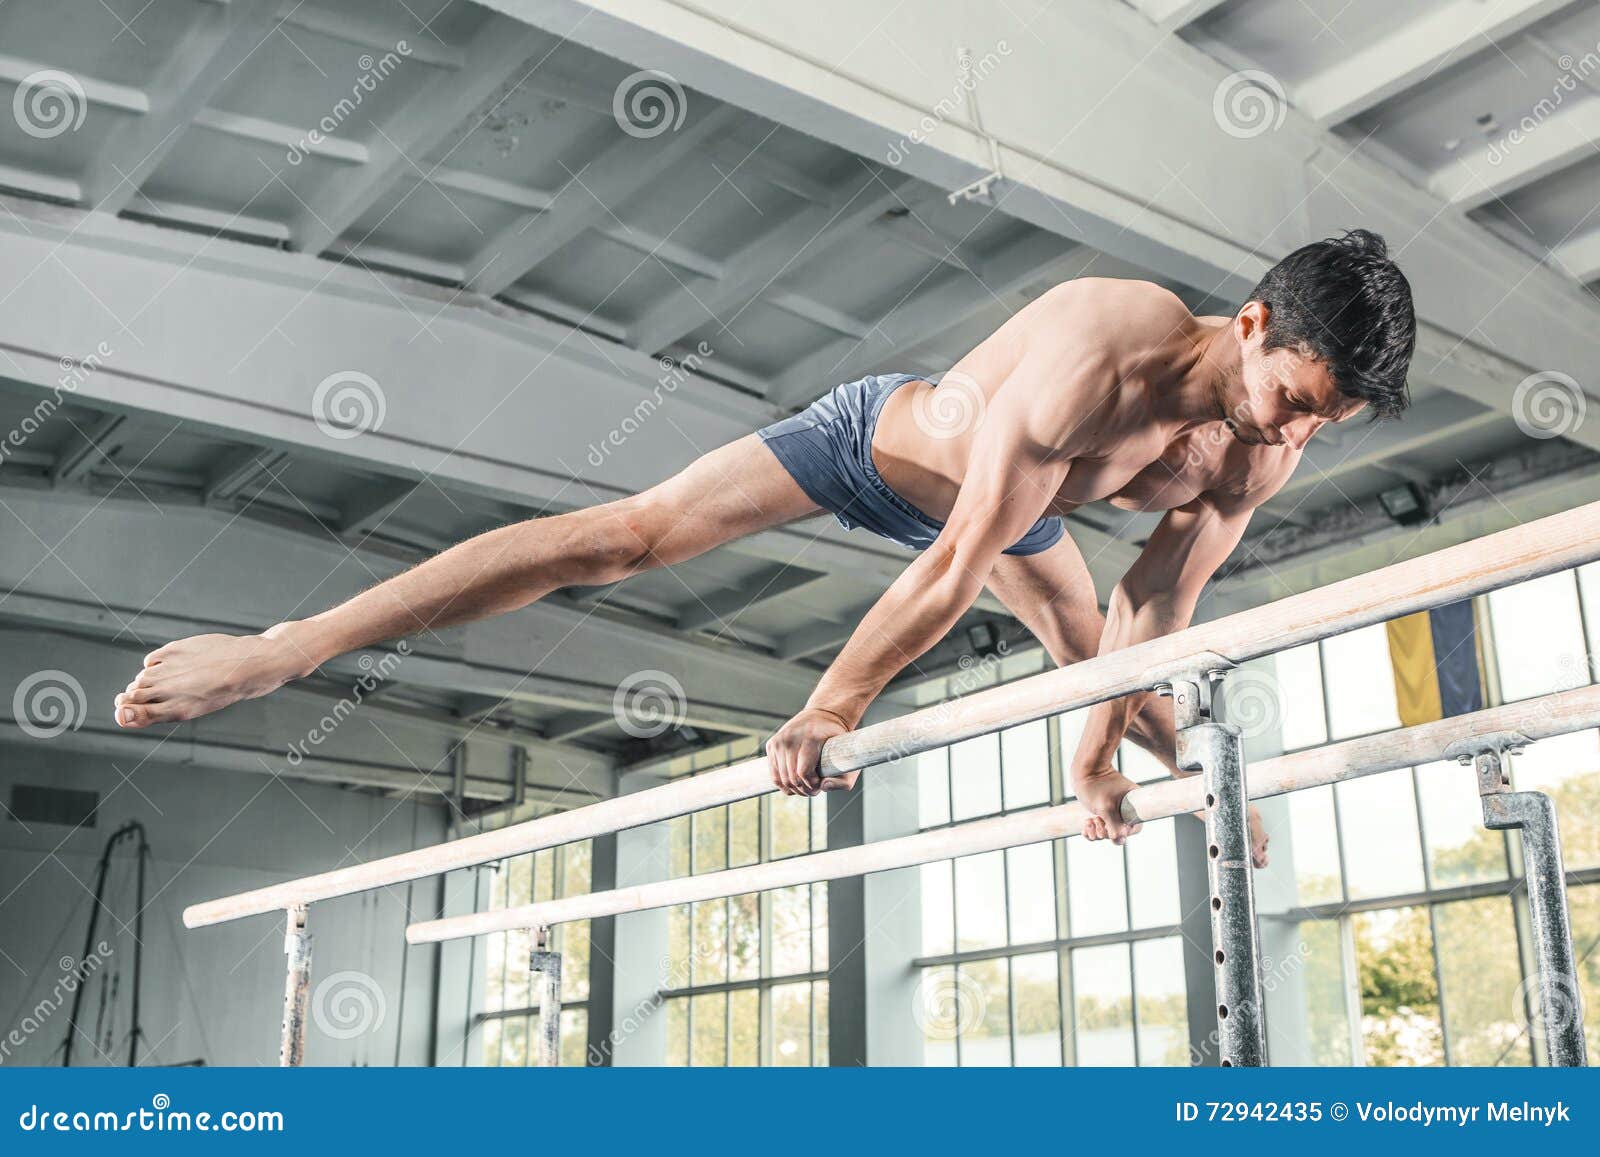 Male Gymnast Performing Handstand On Parallel Bars Stock Image Image Of Parallel Gripping